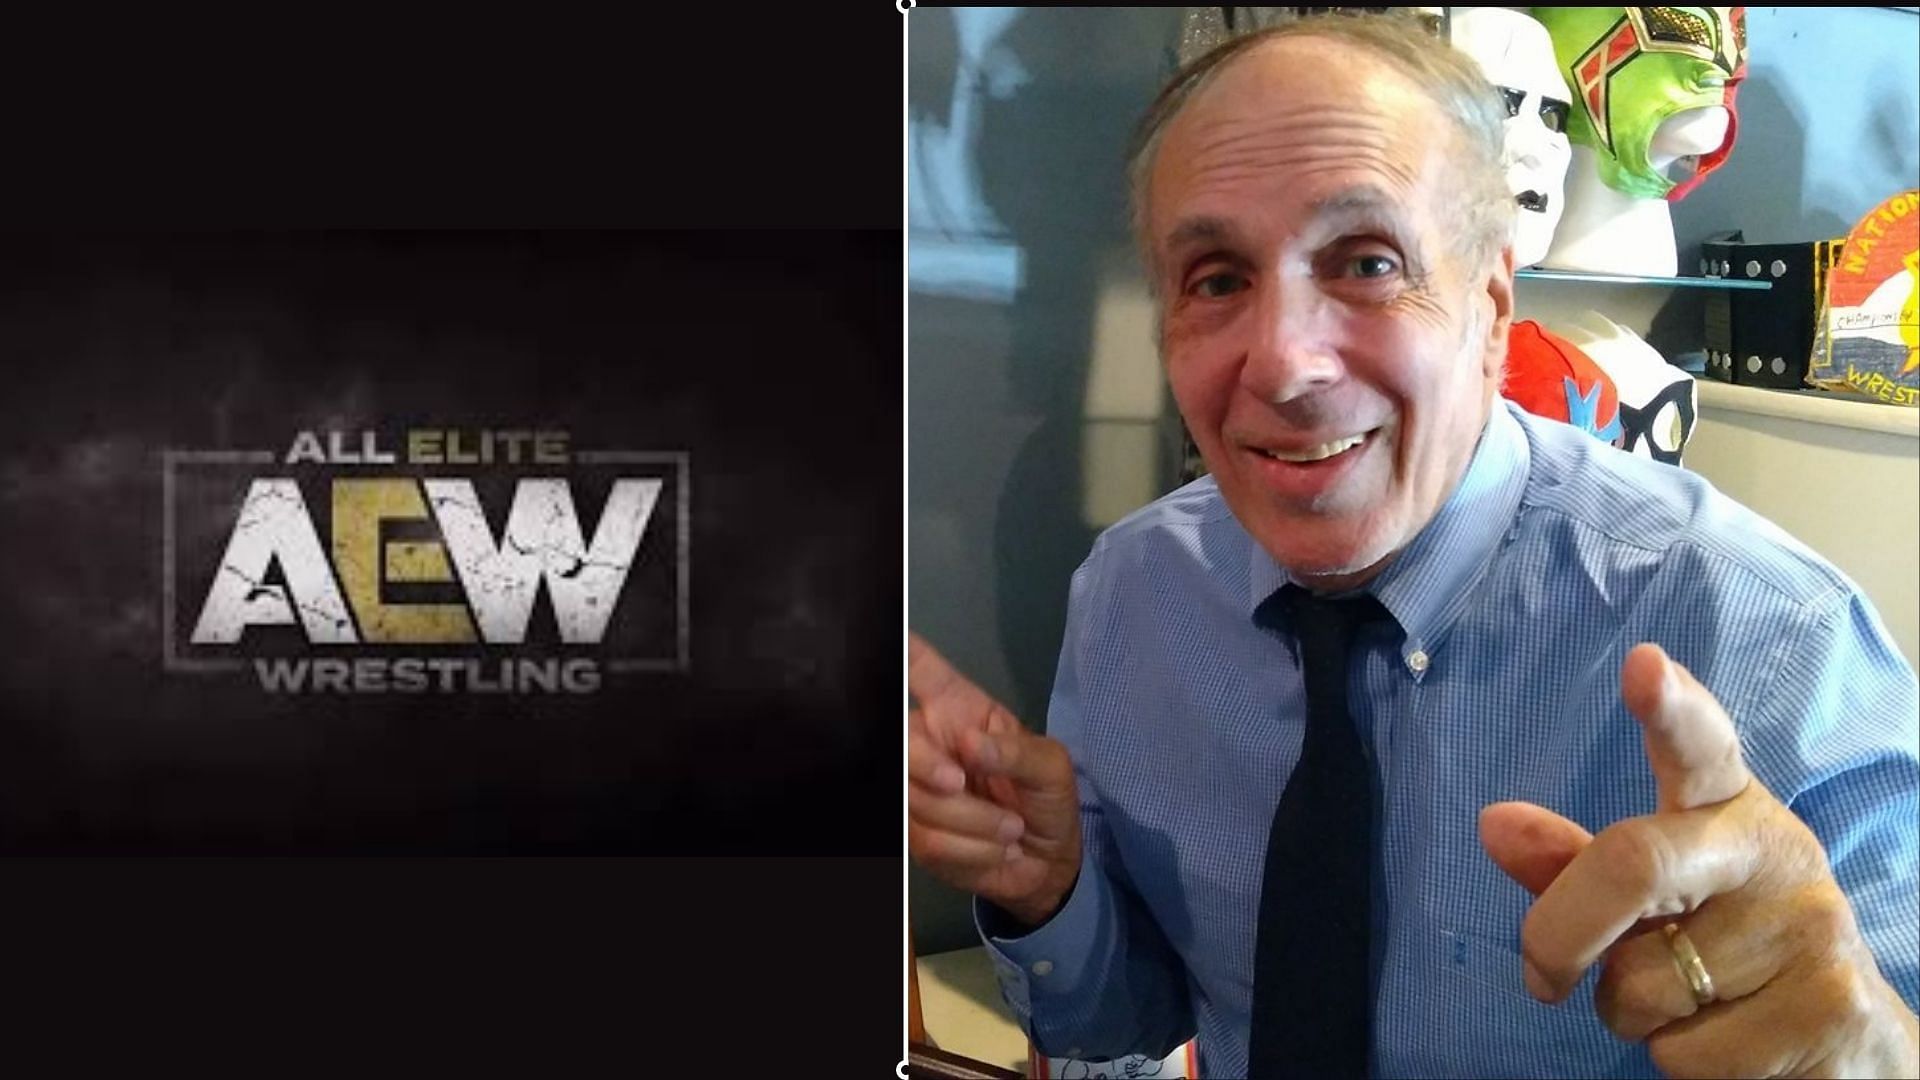 Bill Apter had some interesting thoughts about All Elite Wrestling this week.